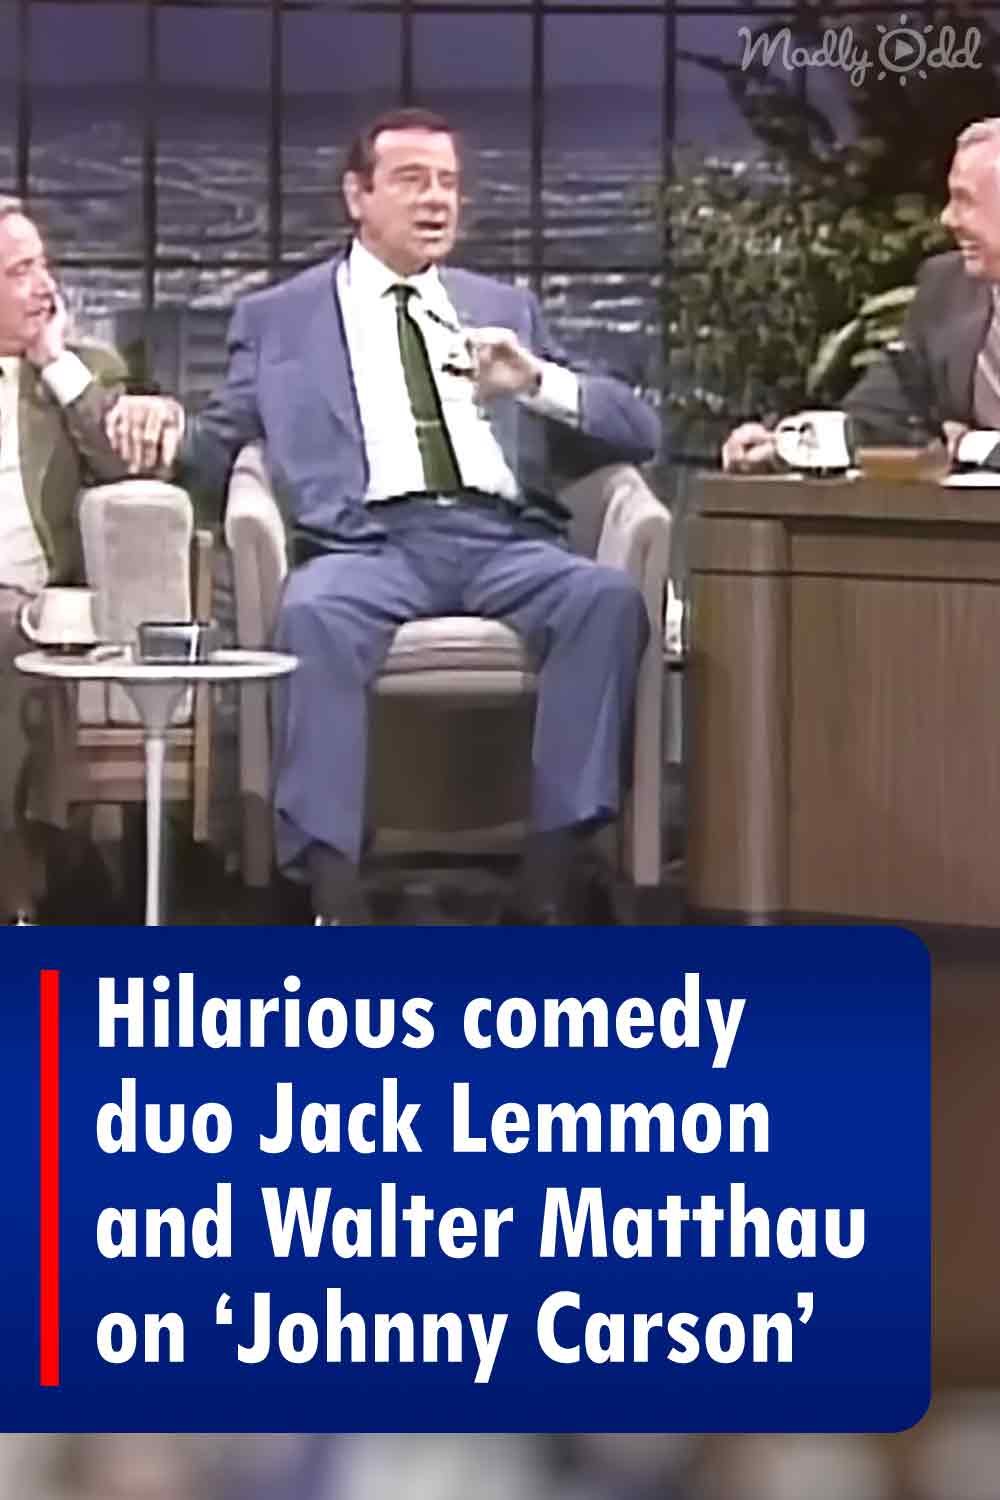 Hilarious comedy duo Jack Lemmon and Walter Matthau on ‘Johnny Carson’